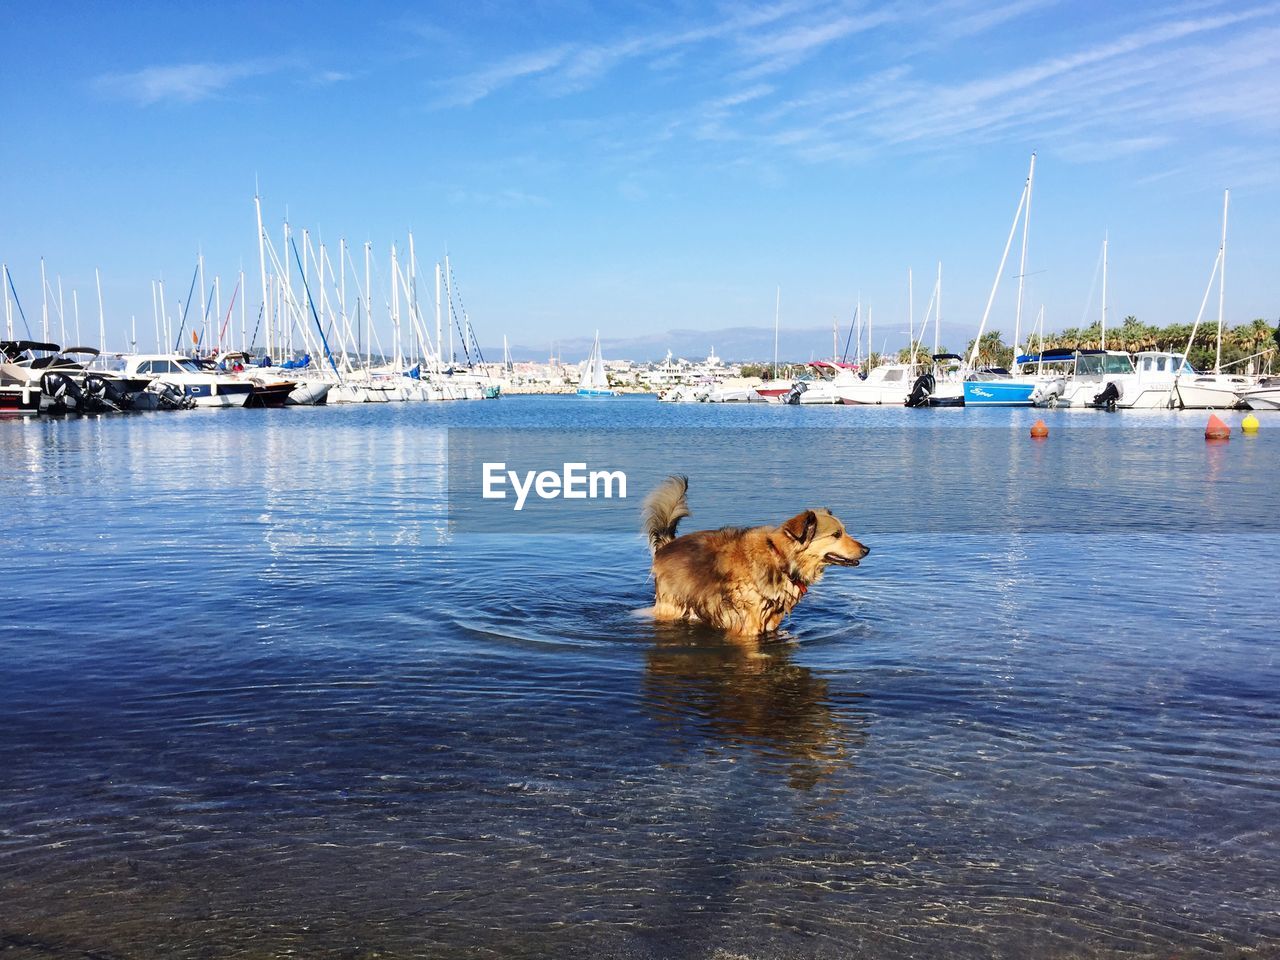 View of a dog in the sea